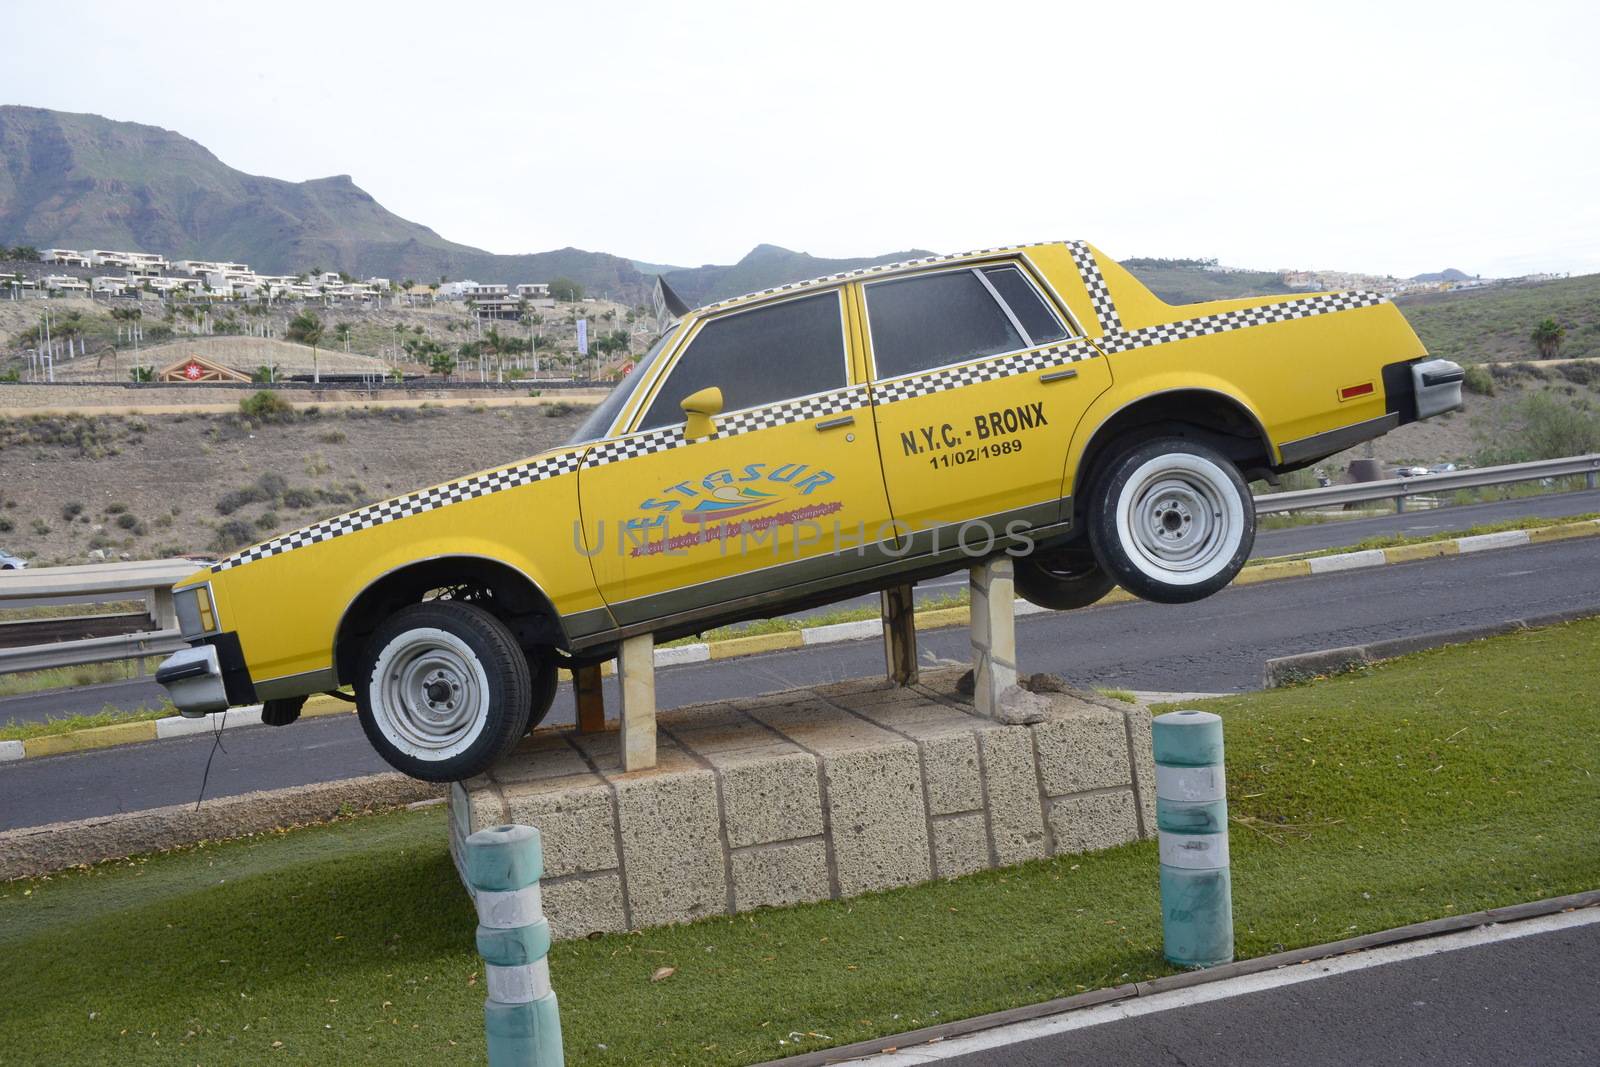 New York yellow cab on stand in ,Las Americas Tenerife